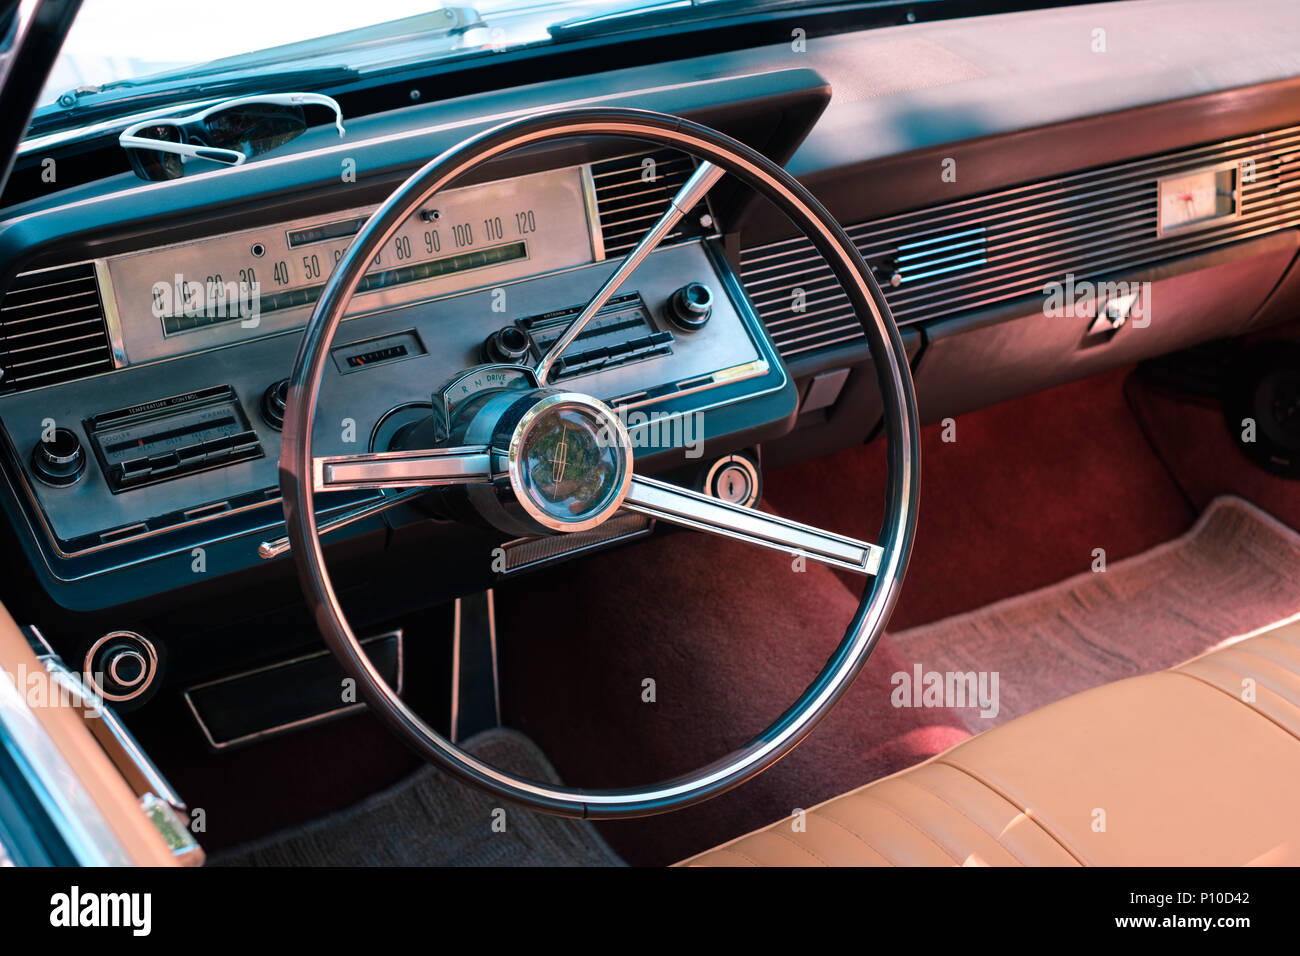 Berlin, Germany - june 09, 2018: Steering wheel,  interior and dashboard of  vintage car cockpit at Classic Days, Oldtimer  automobile event in Berlin Stock Photo